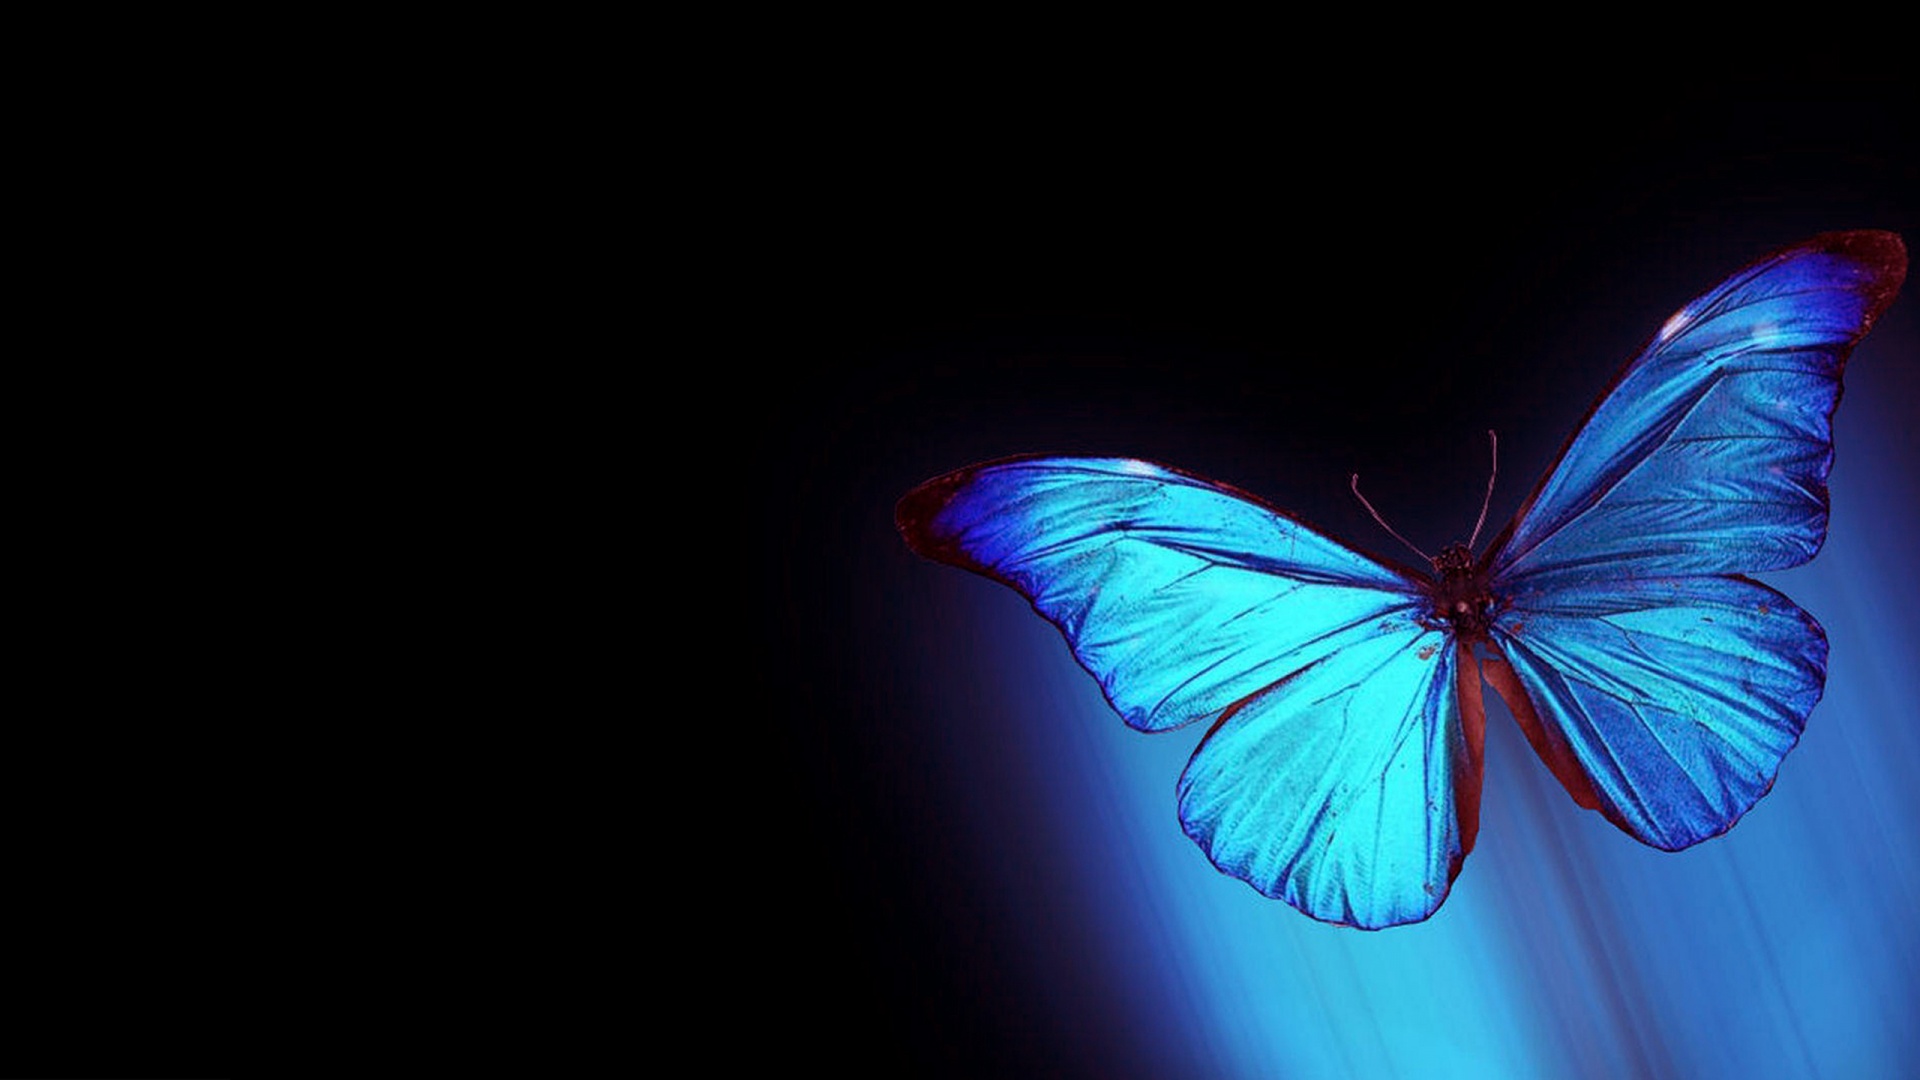 Abstract Butterfly Wallpapers For Laptop Unique HD Wallpapers 1920x1080